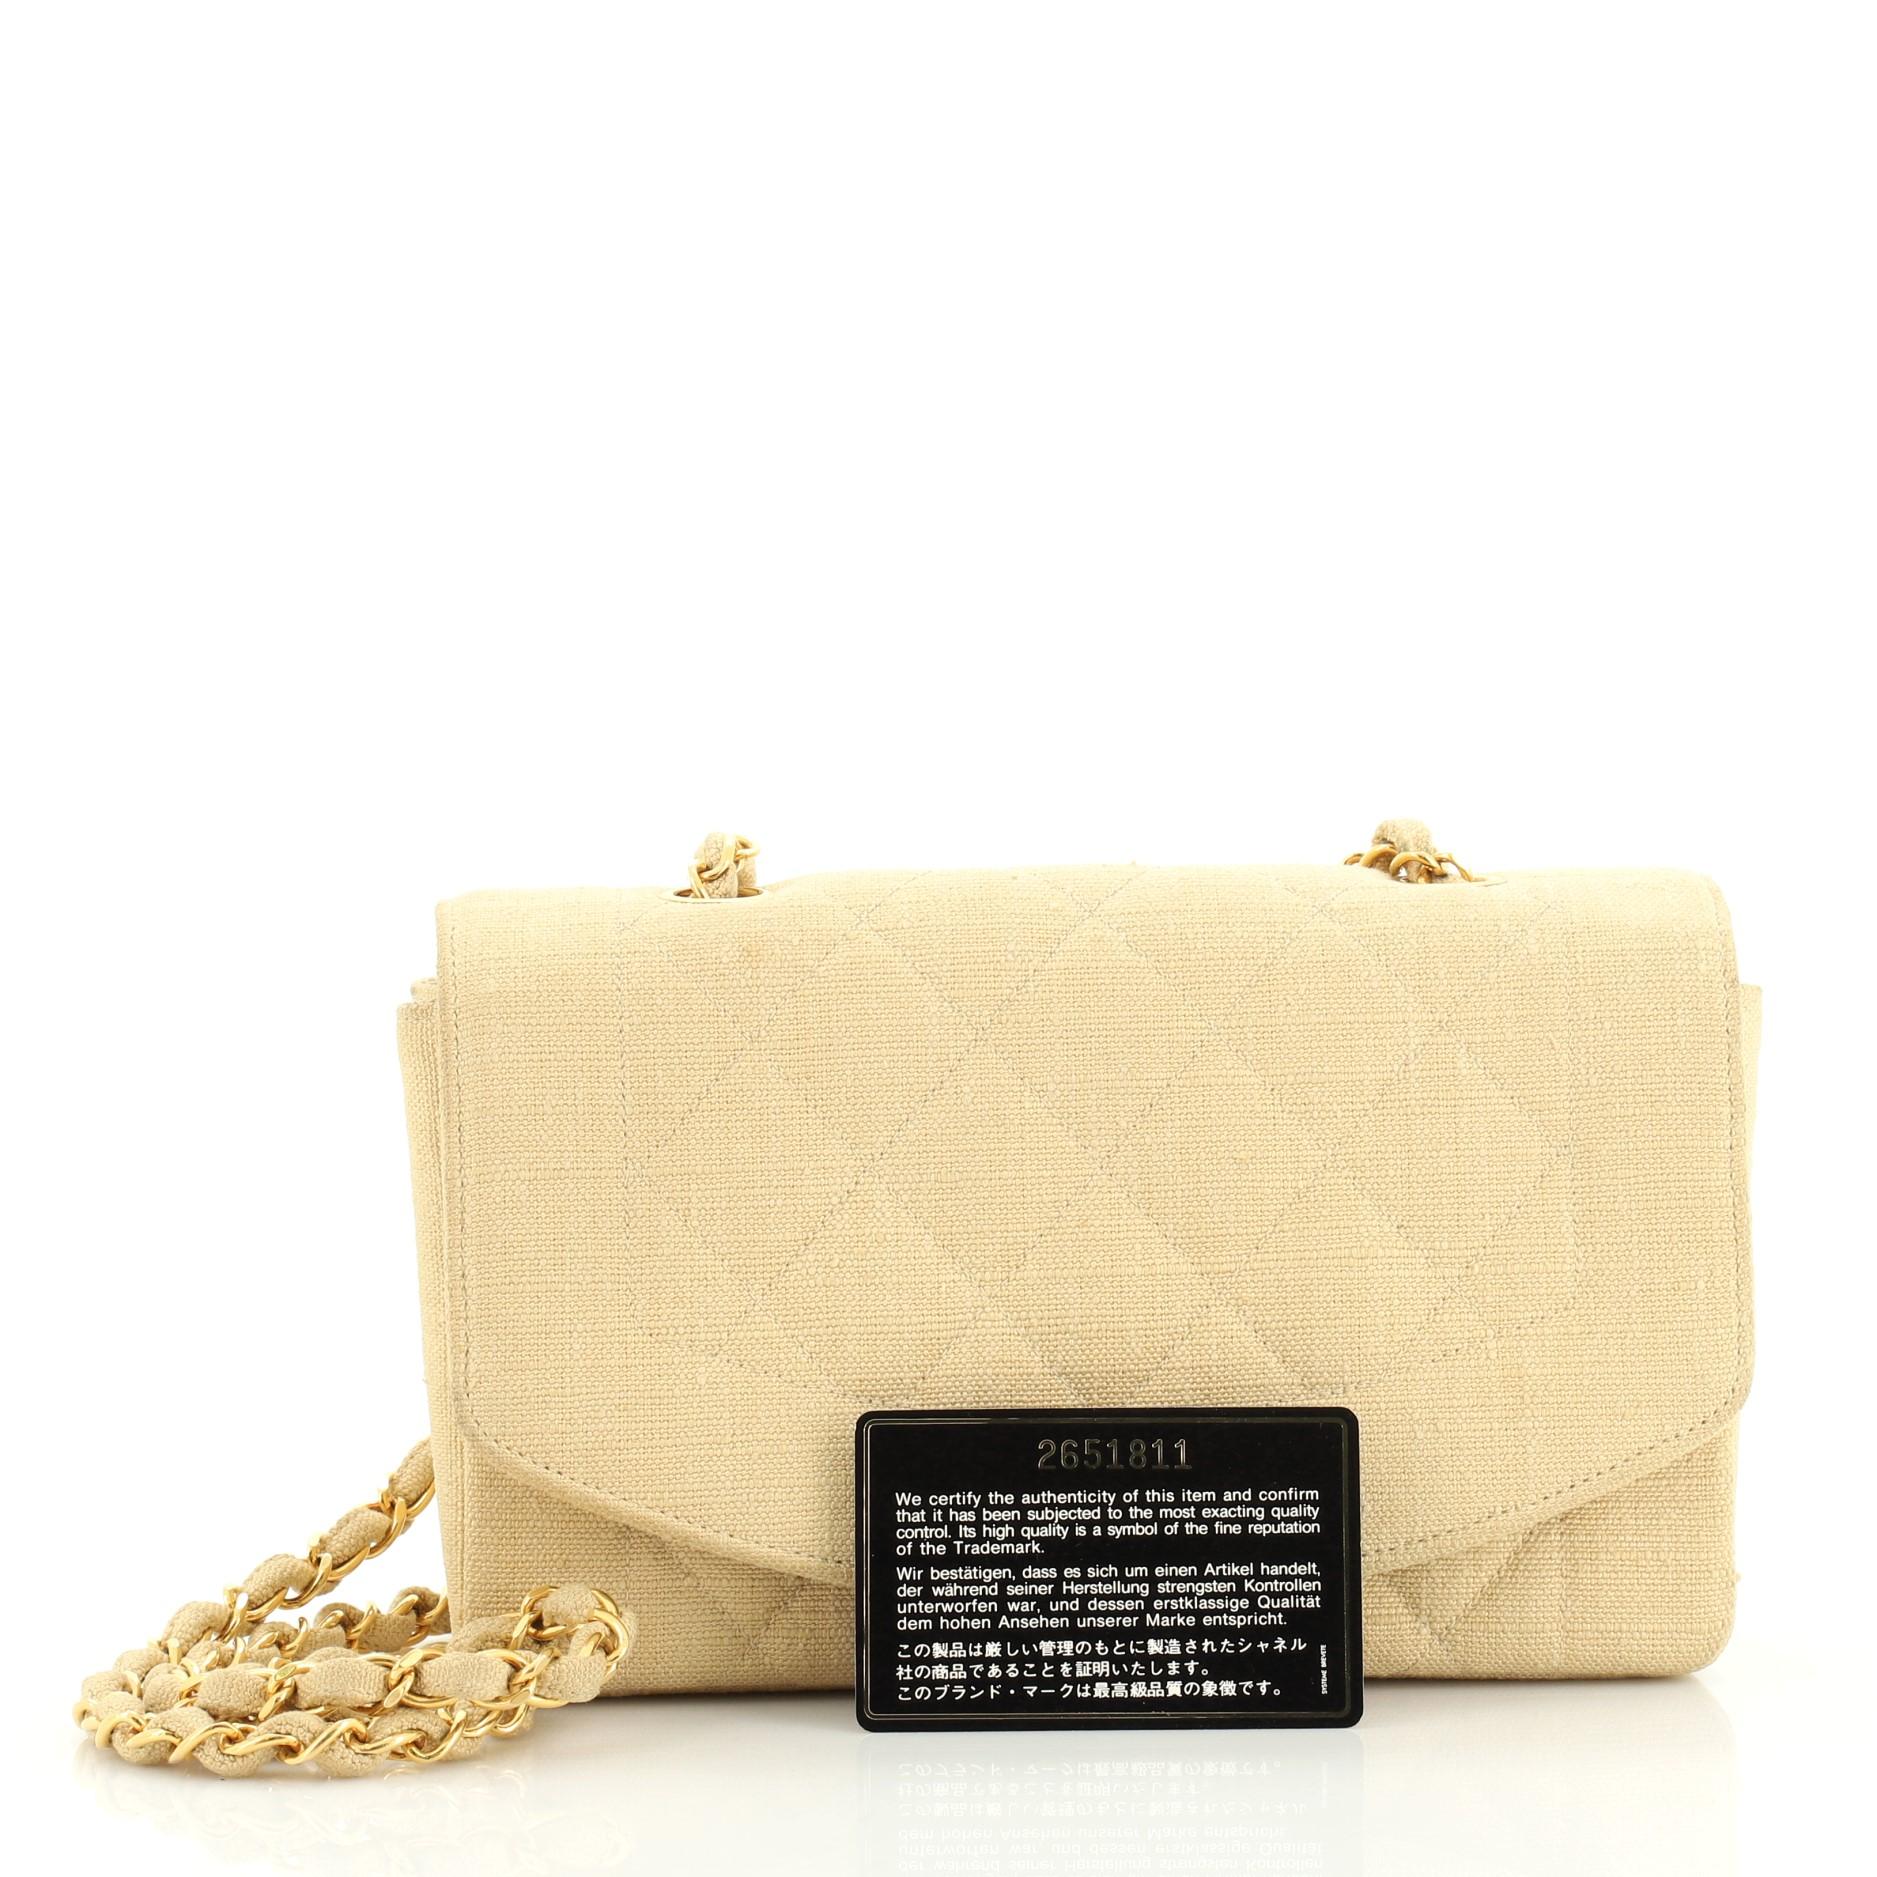 This Chanel Vintage Diana Flap Bag Quilted Canvas Small, crafted in neutral canvas, features woven in leather chain link strap and gold-tone hardware. Its CC turn-lock closure opens to a neutral leather interior with zip and slip pockets. Hologram